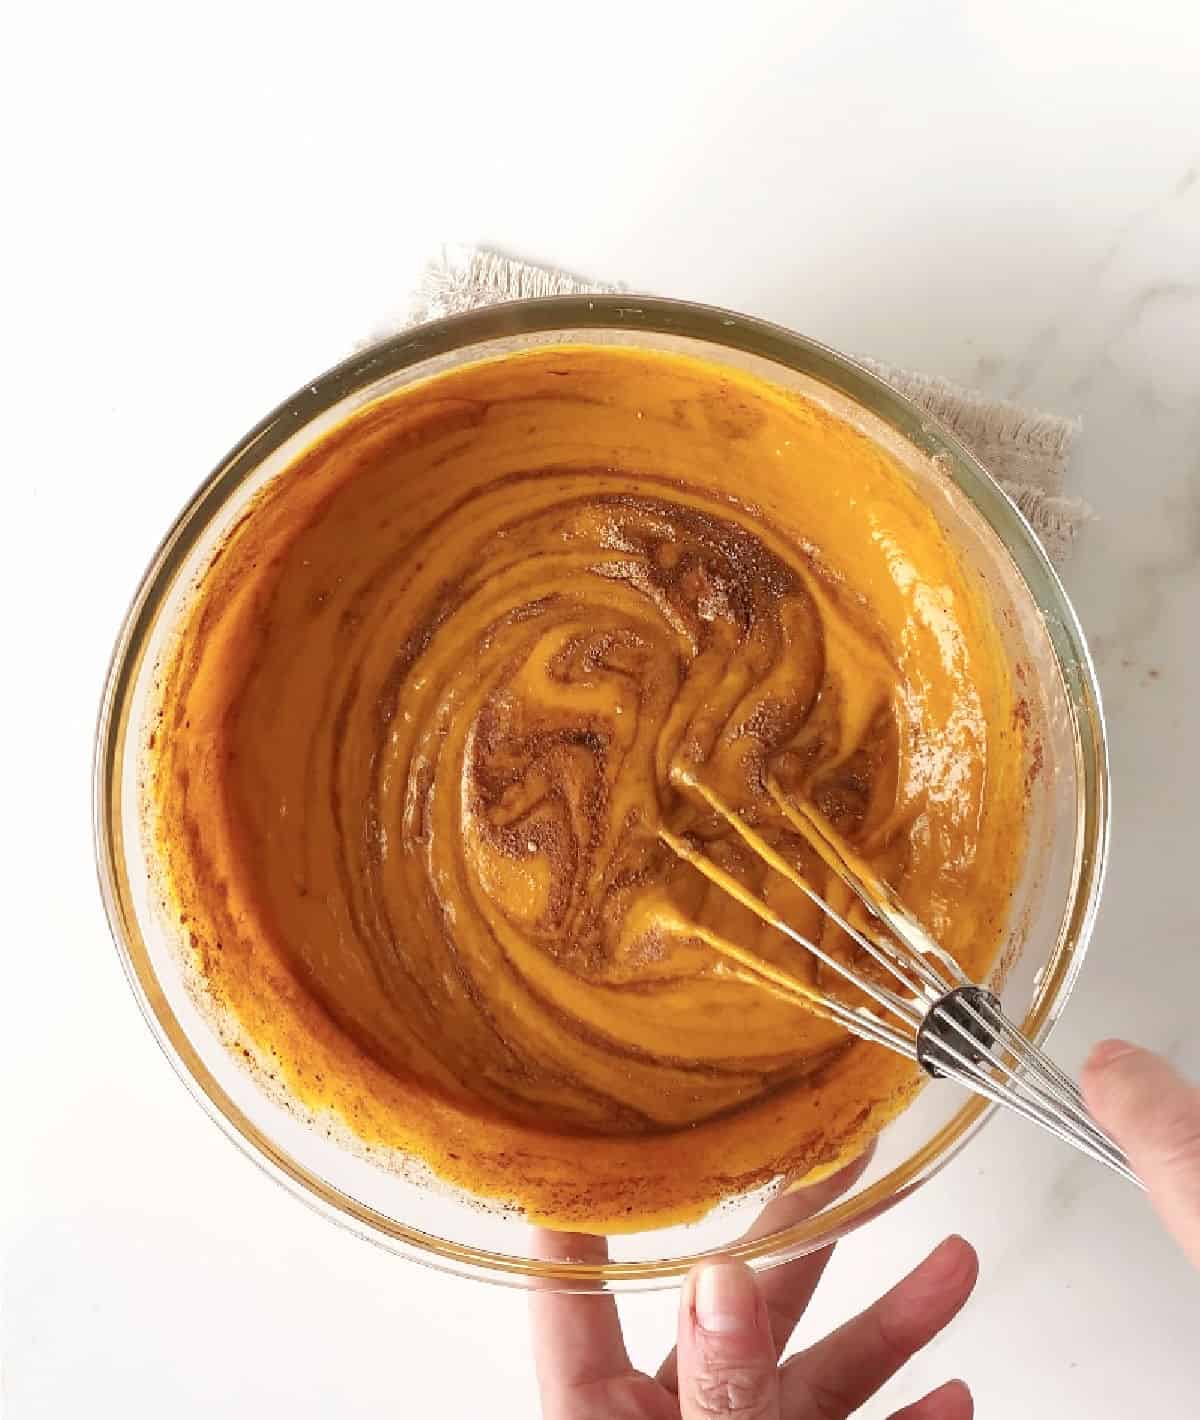 Top view of pumpkin pie filling with spices being whisked in a glass bowl on a white surface.